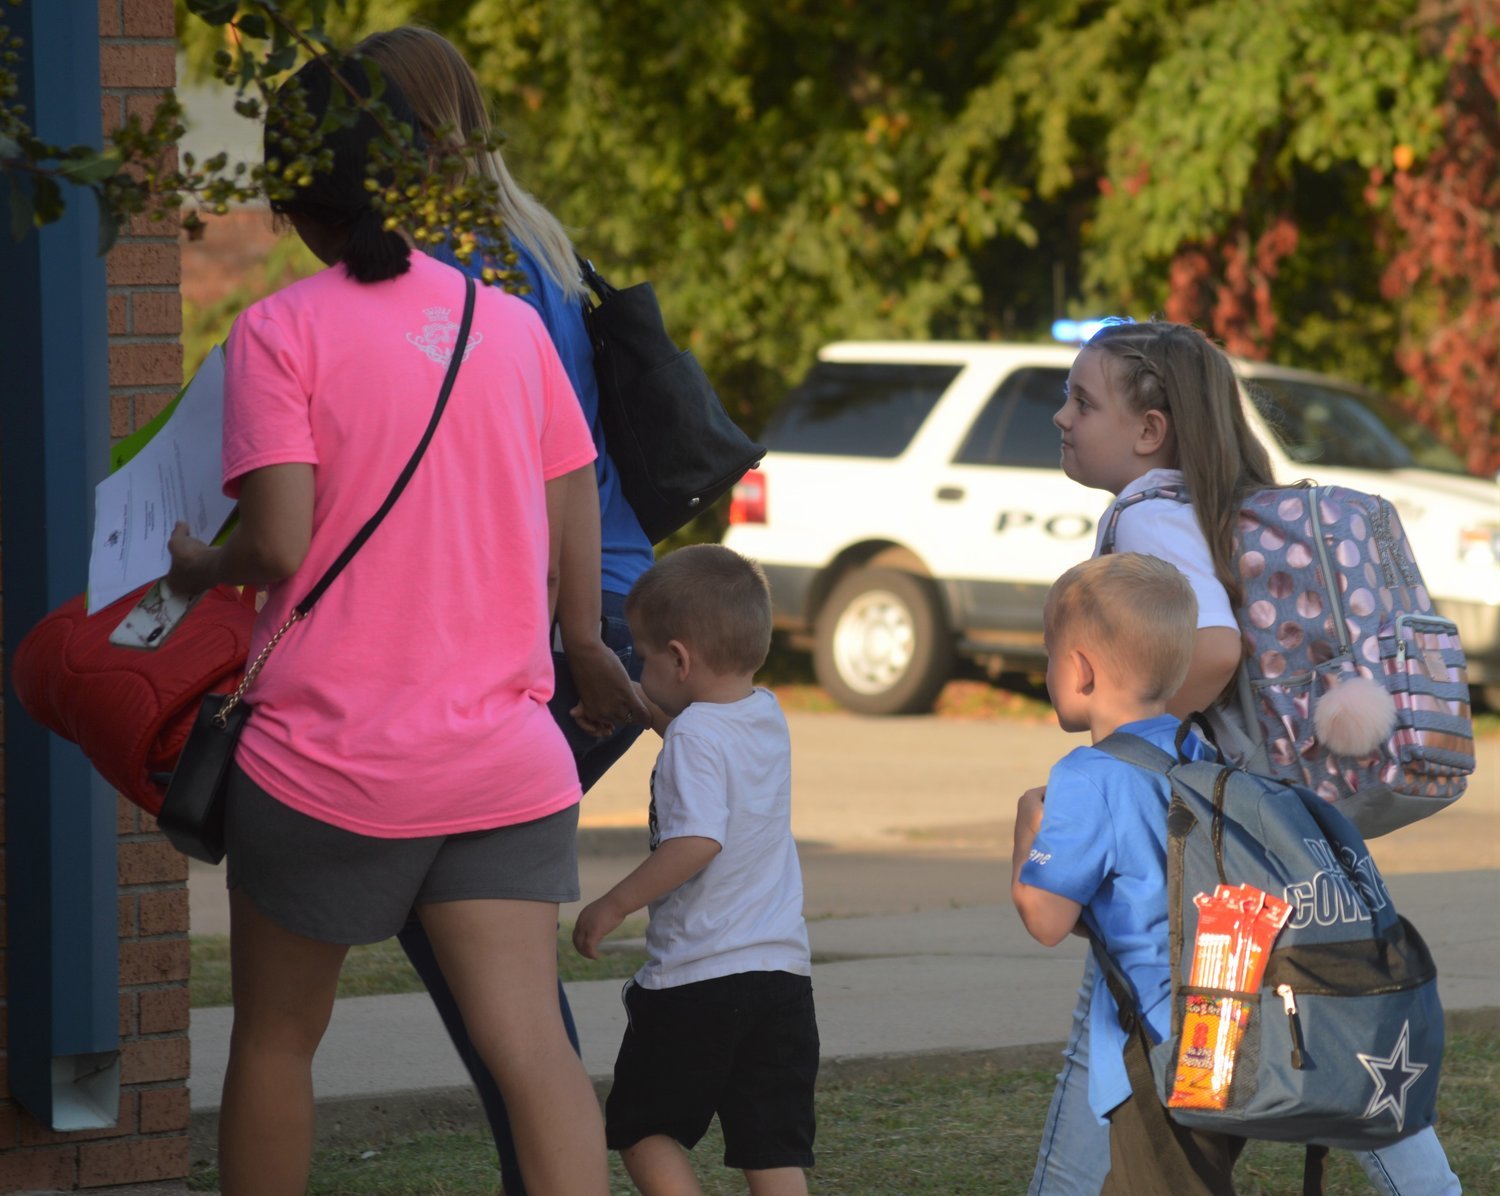 Quitman Elementary students along with their guardians walk toward the QES school entrance during the first day of school on Aug. 21.